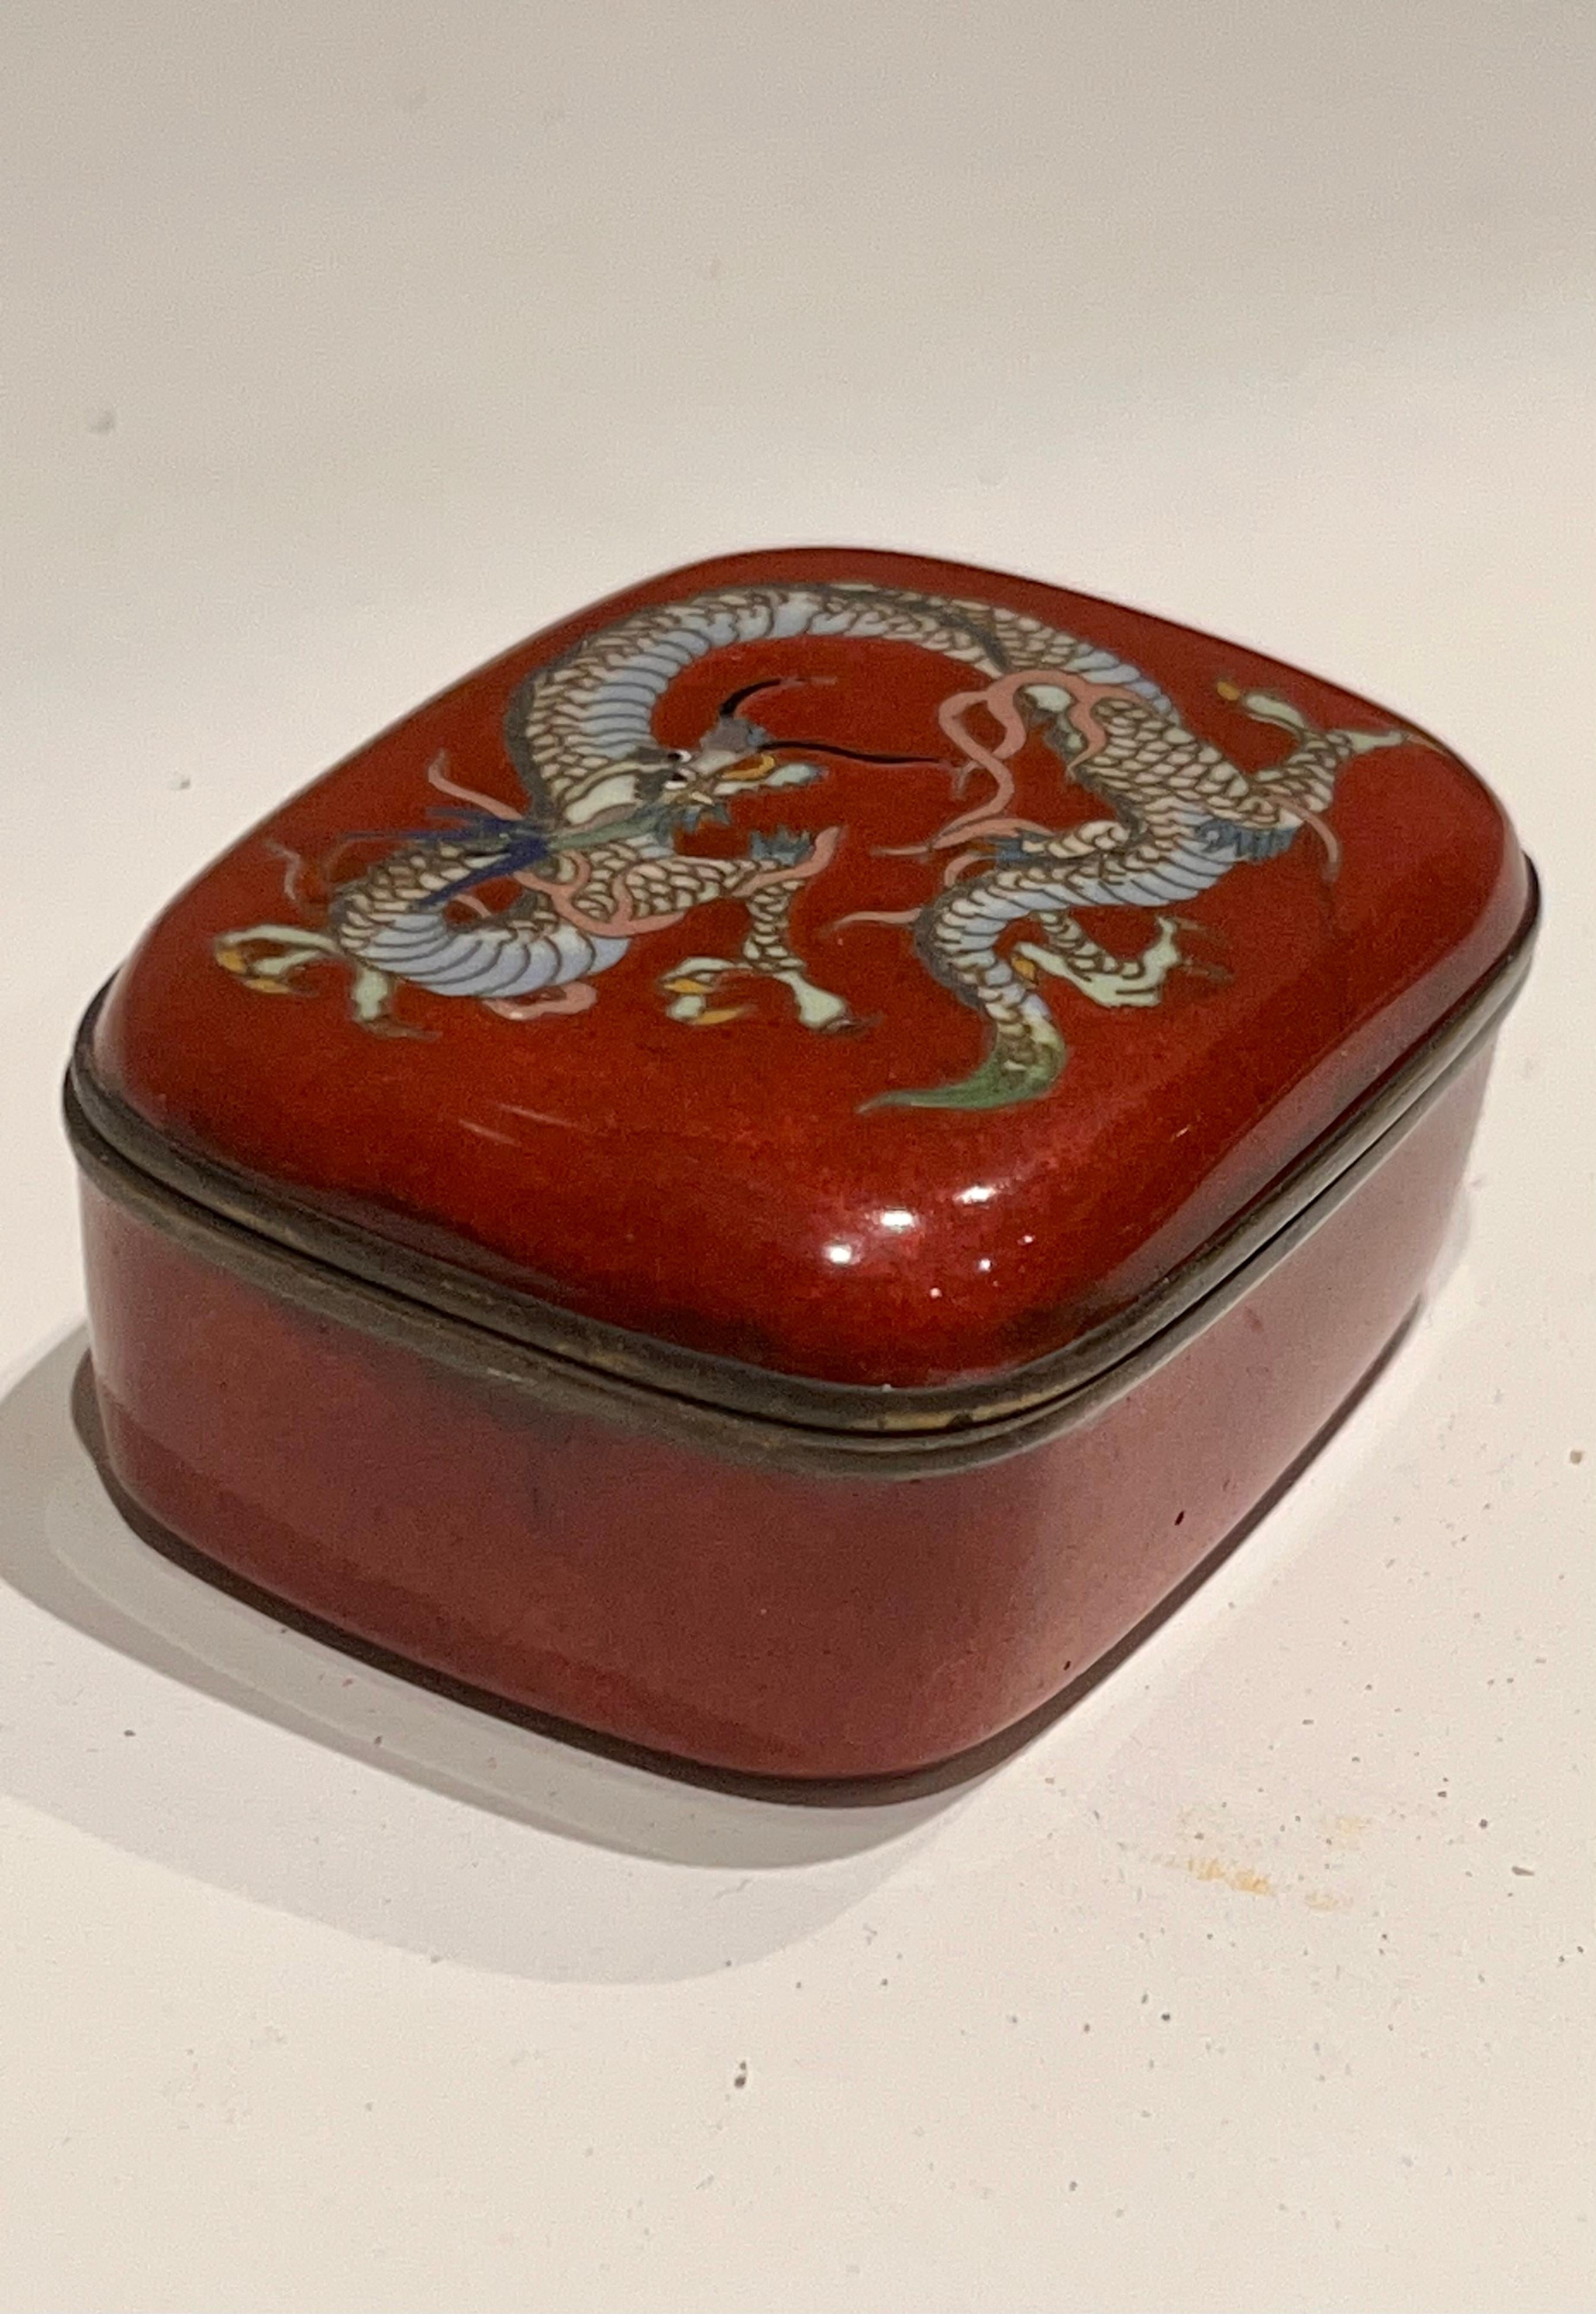 Exquisite Japanese Cloisonne Enamel Box and Cover. 19th C For Sale 5